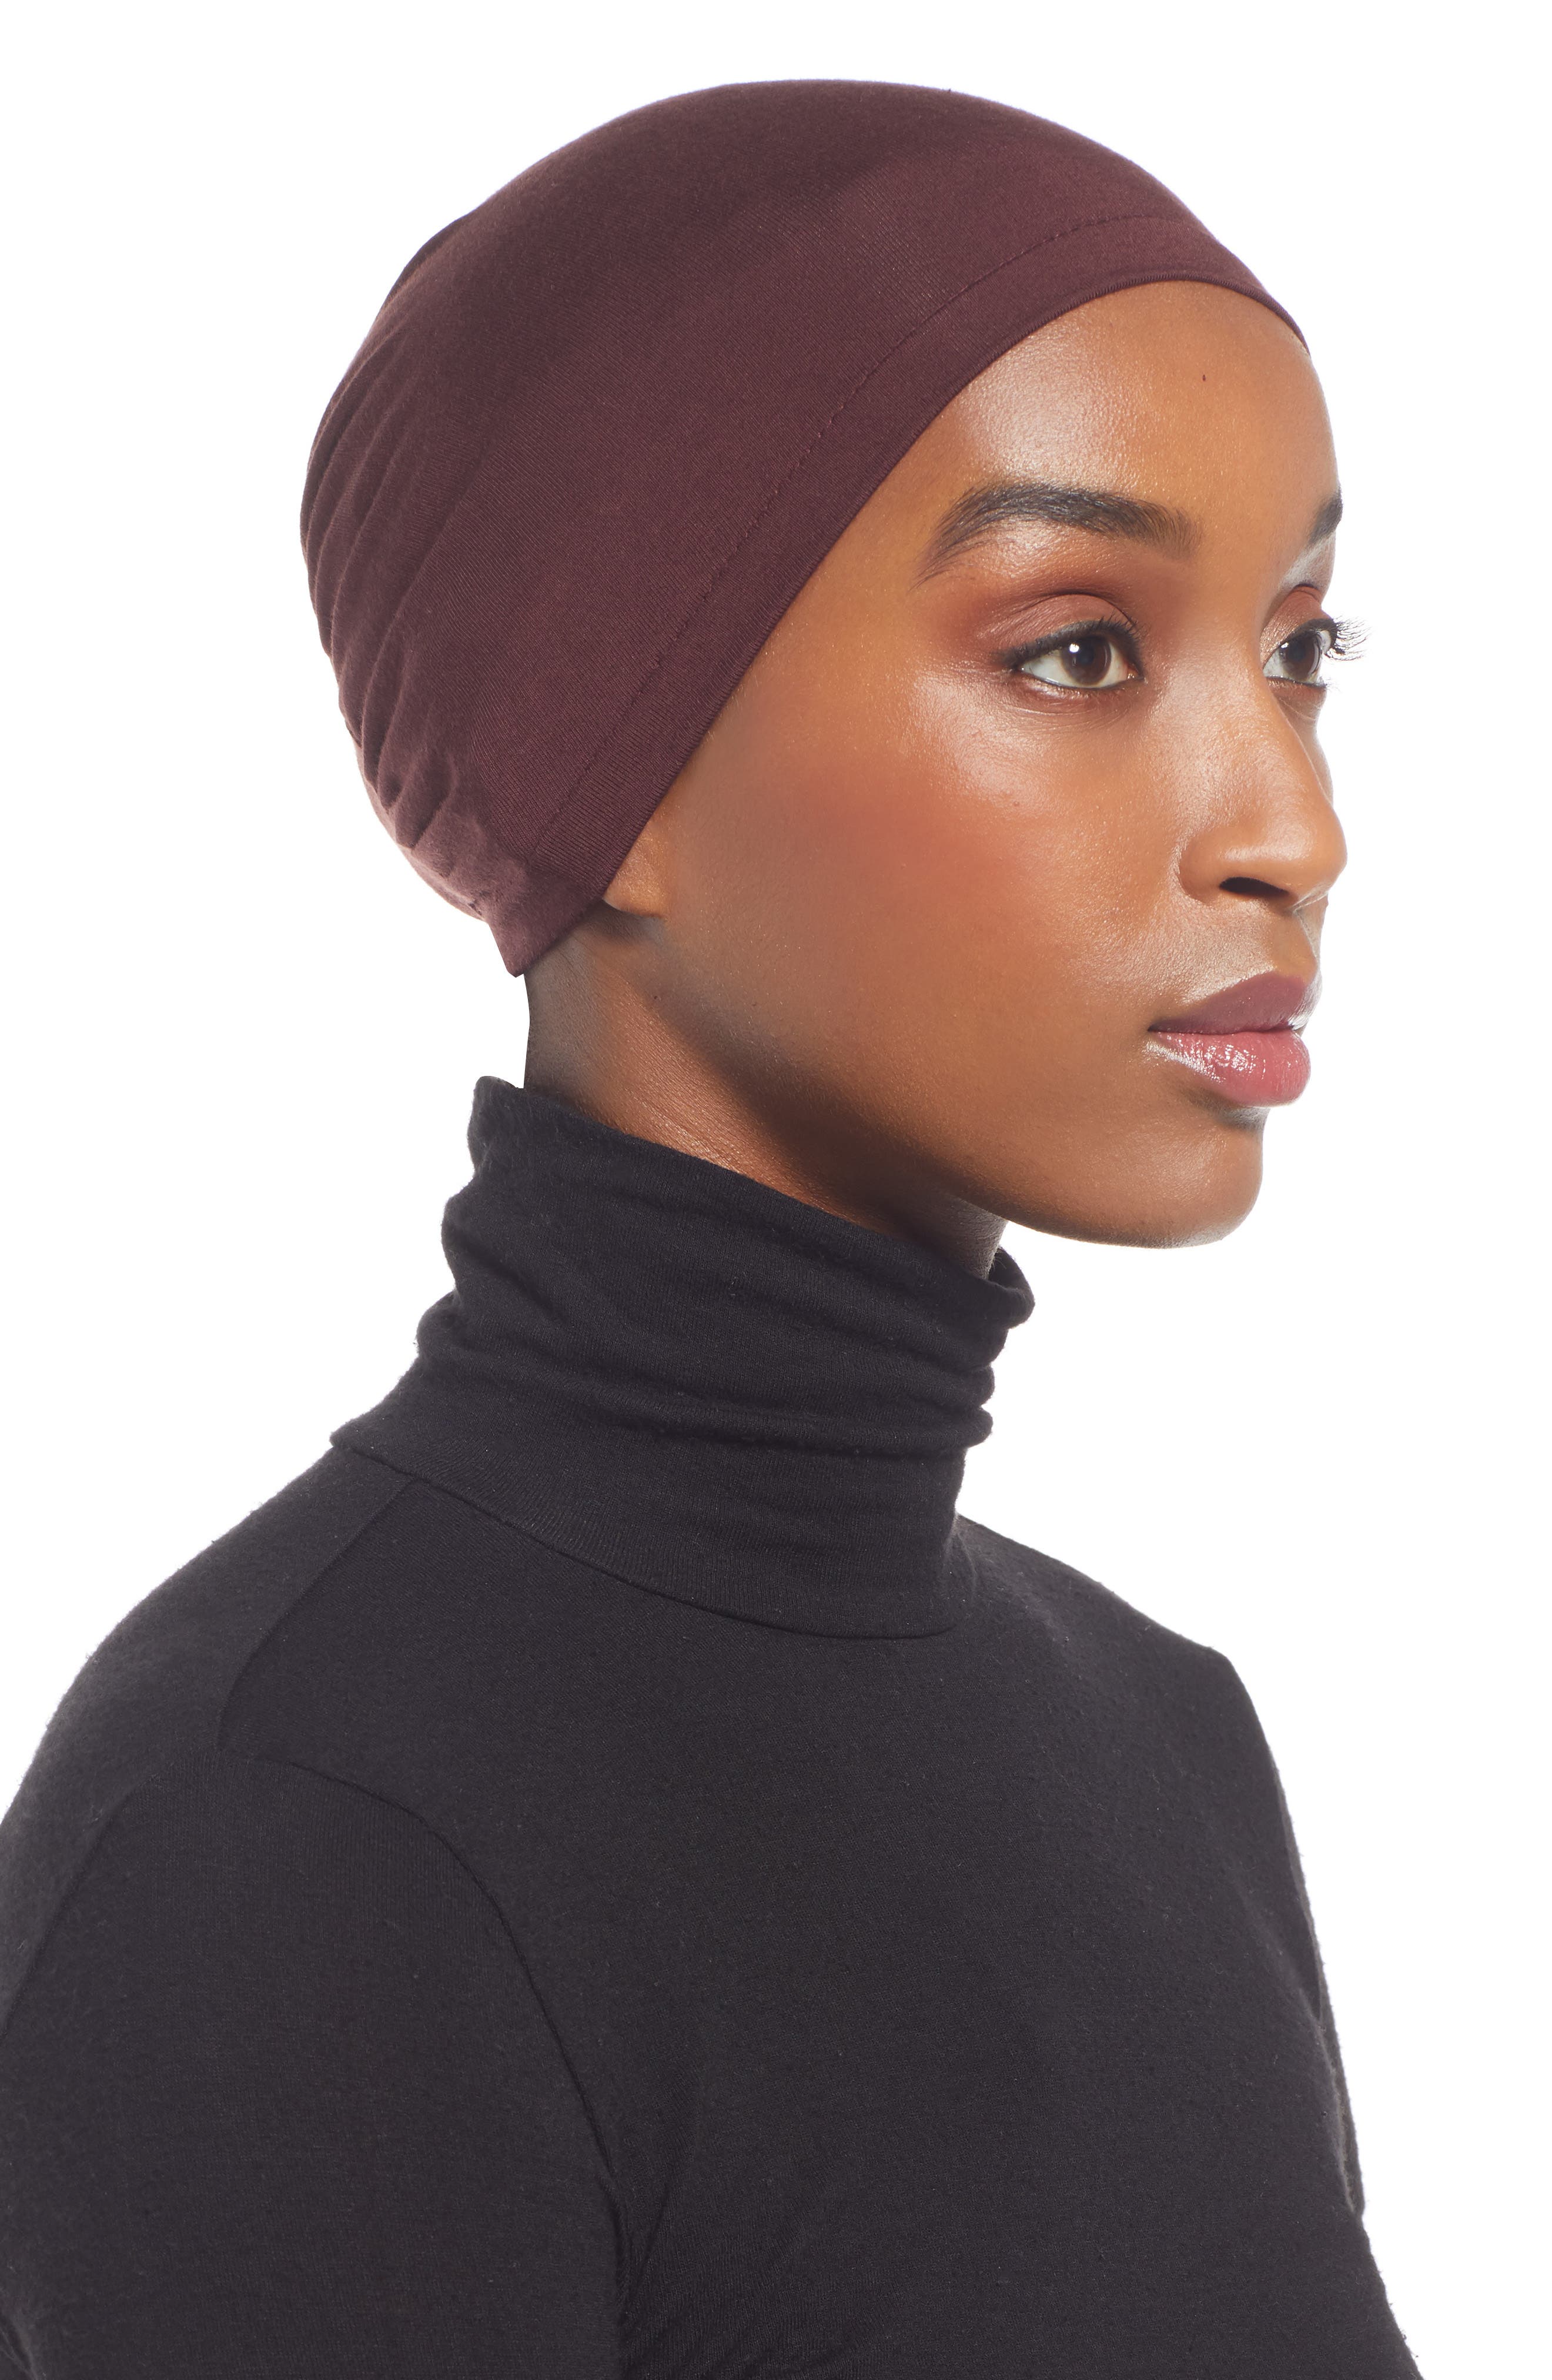 Many colors Hijab Cap Under Scarf Cap Very Comfortable 